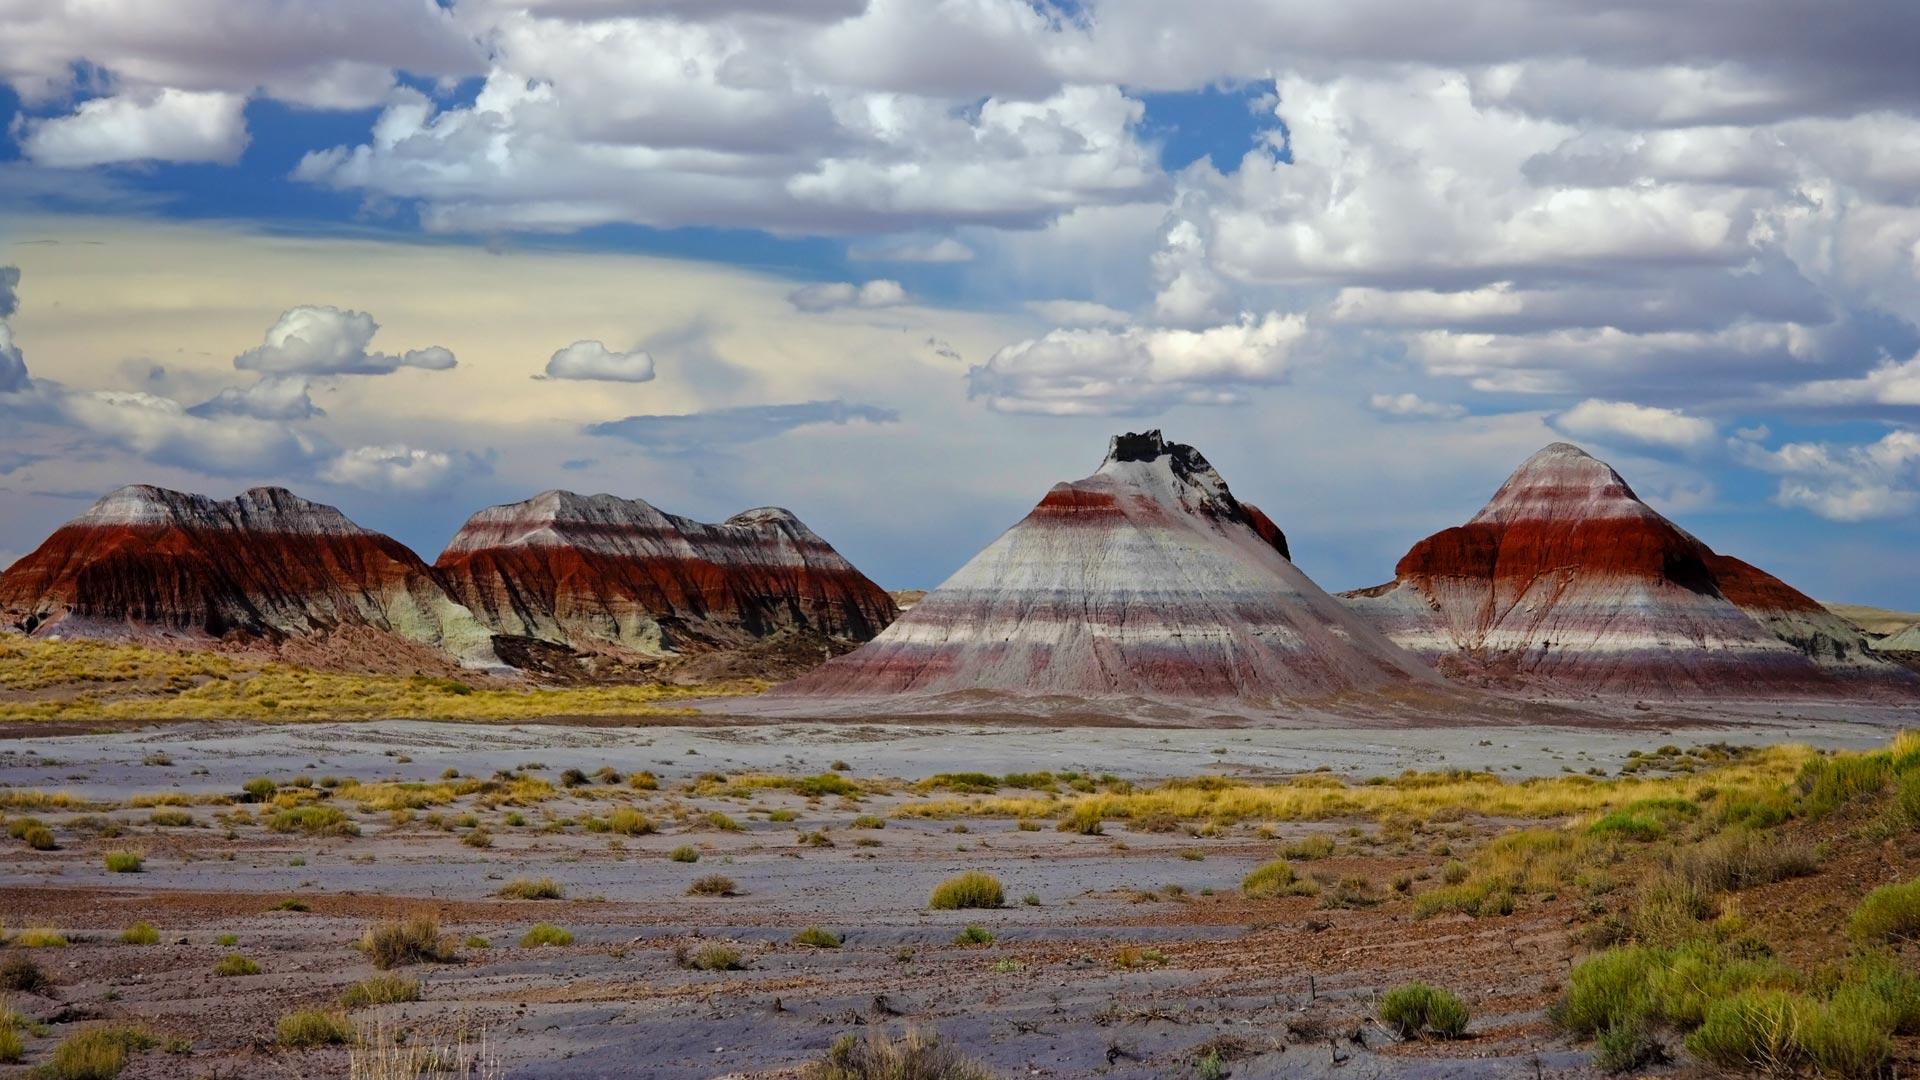 Mountains in the Painted Desert, Petrified Forest National Park